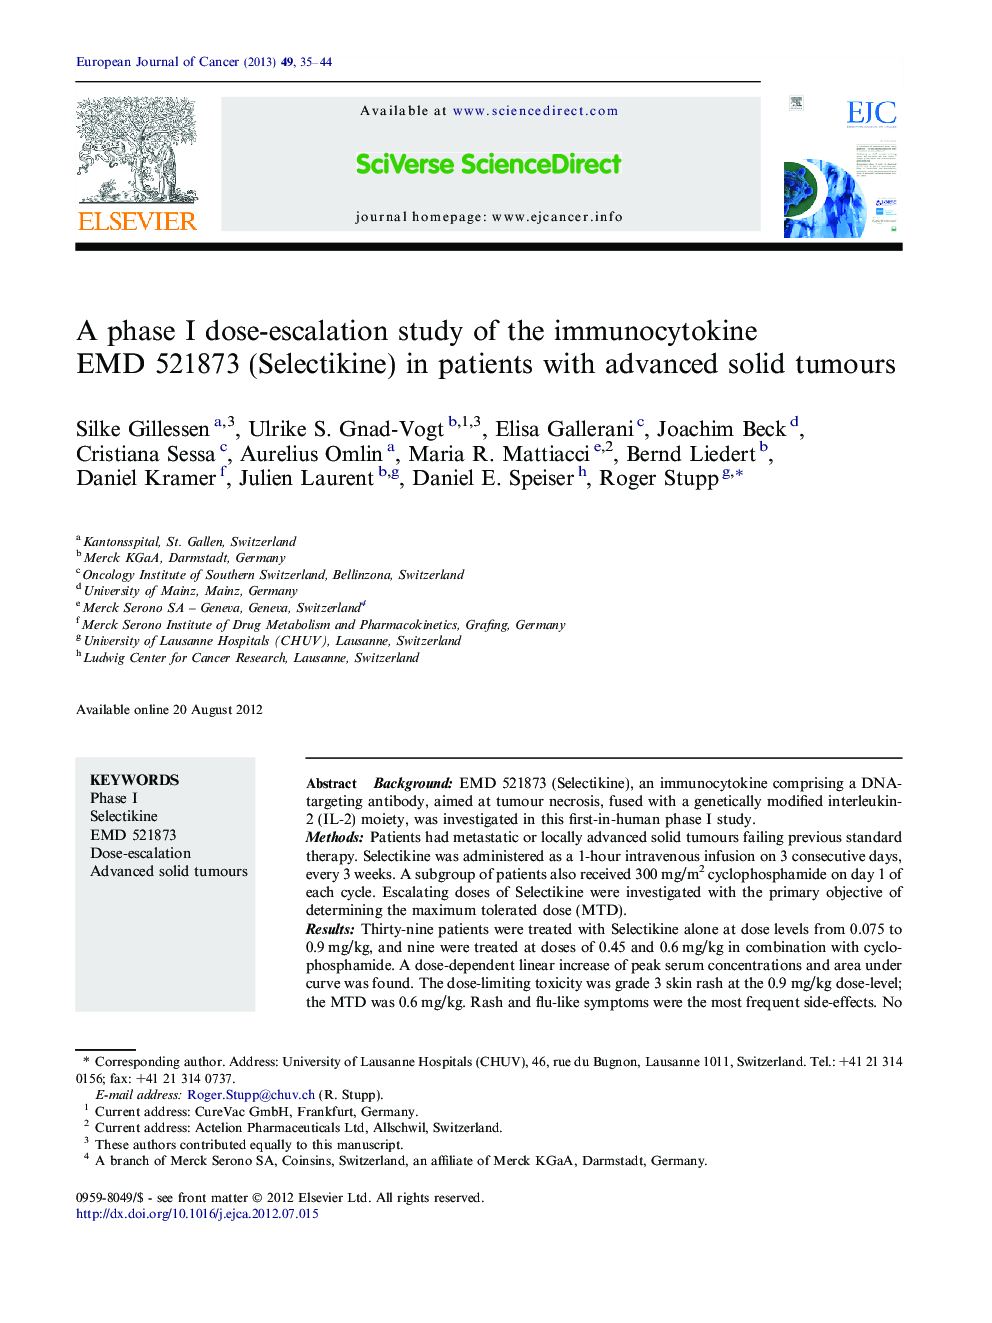 A phase I dose-escalation study of the immunocytokine EMD 521873 (Selectikine) in patients with advanced solid tumours